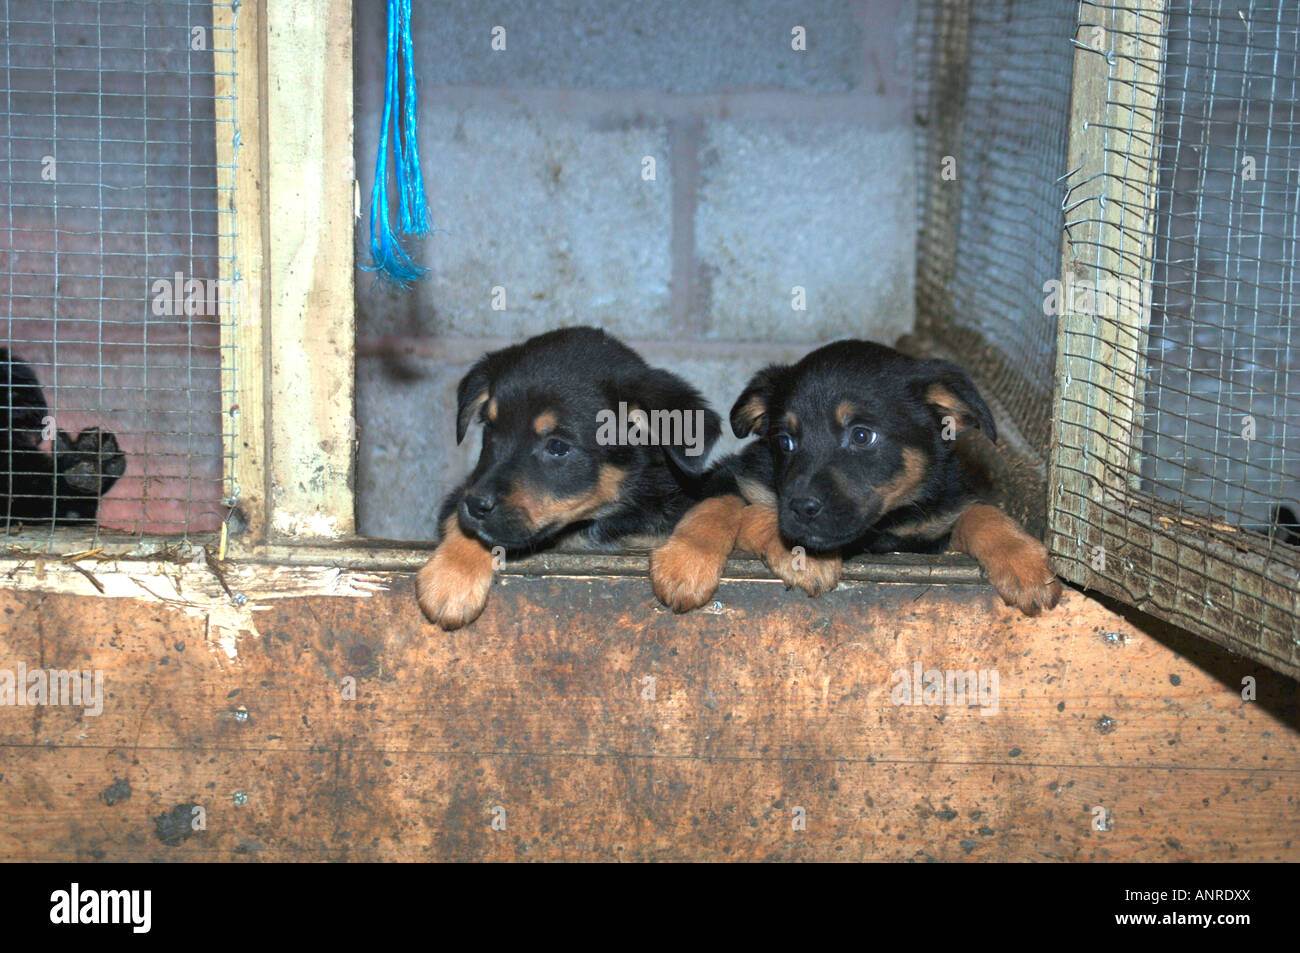 Cross Bred Rothwieller Collie   Puppies, In The Enterance To Their Enclosure. Stock Photo